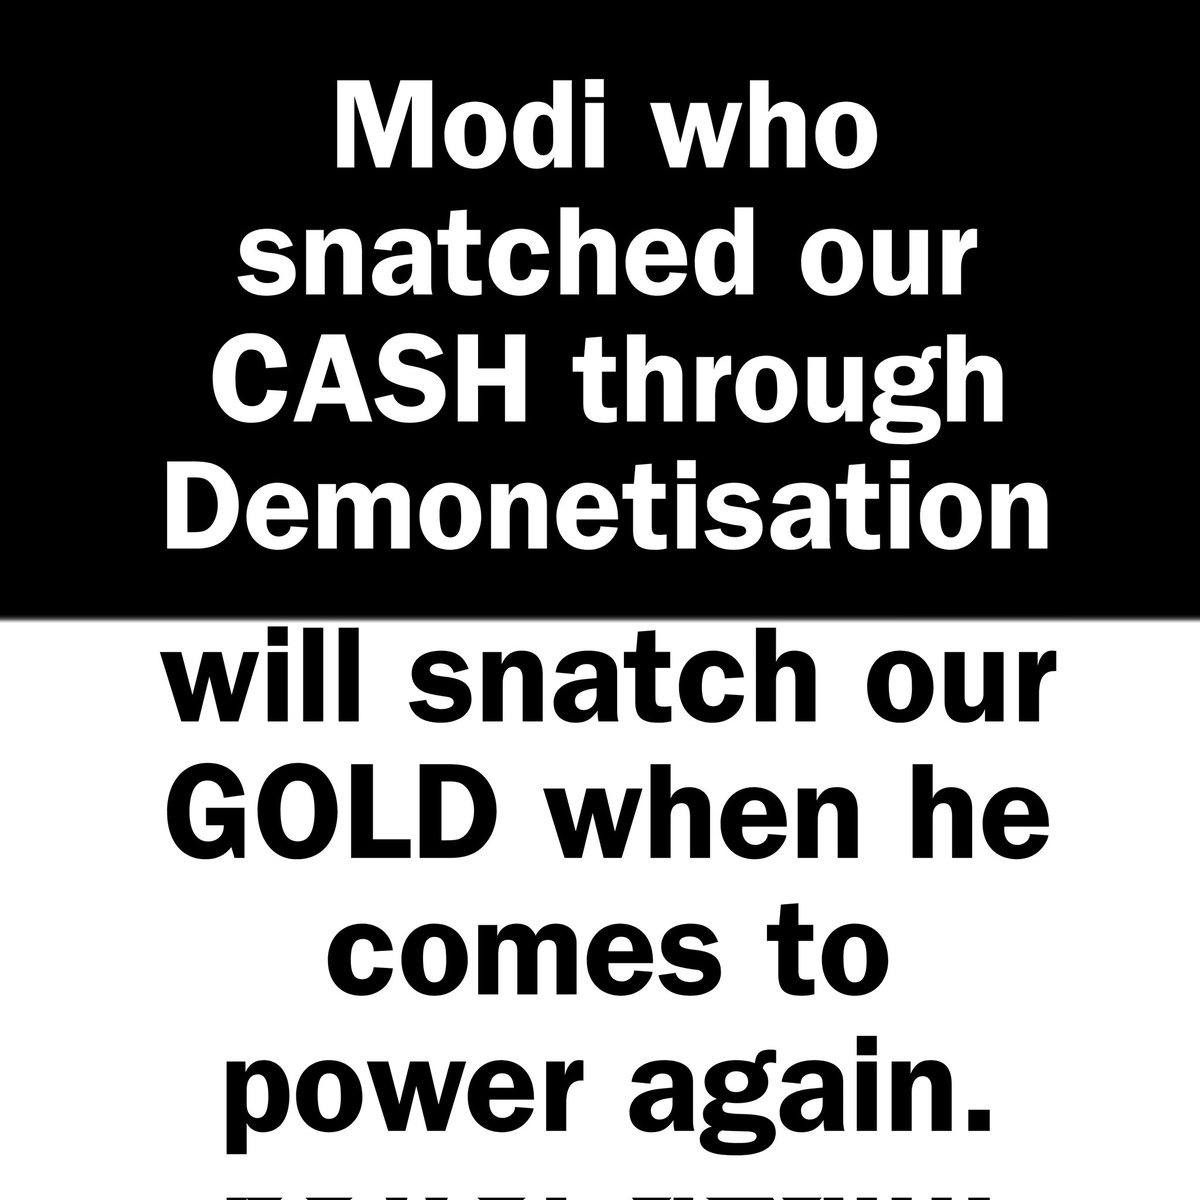 Modi who snatched our CASH through Demonetisation will snatch our GOLD when he comes to power again.